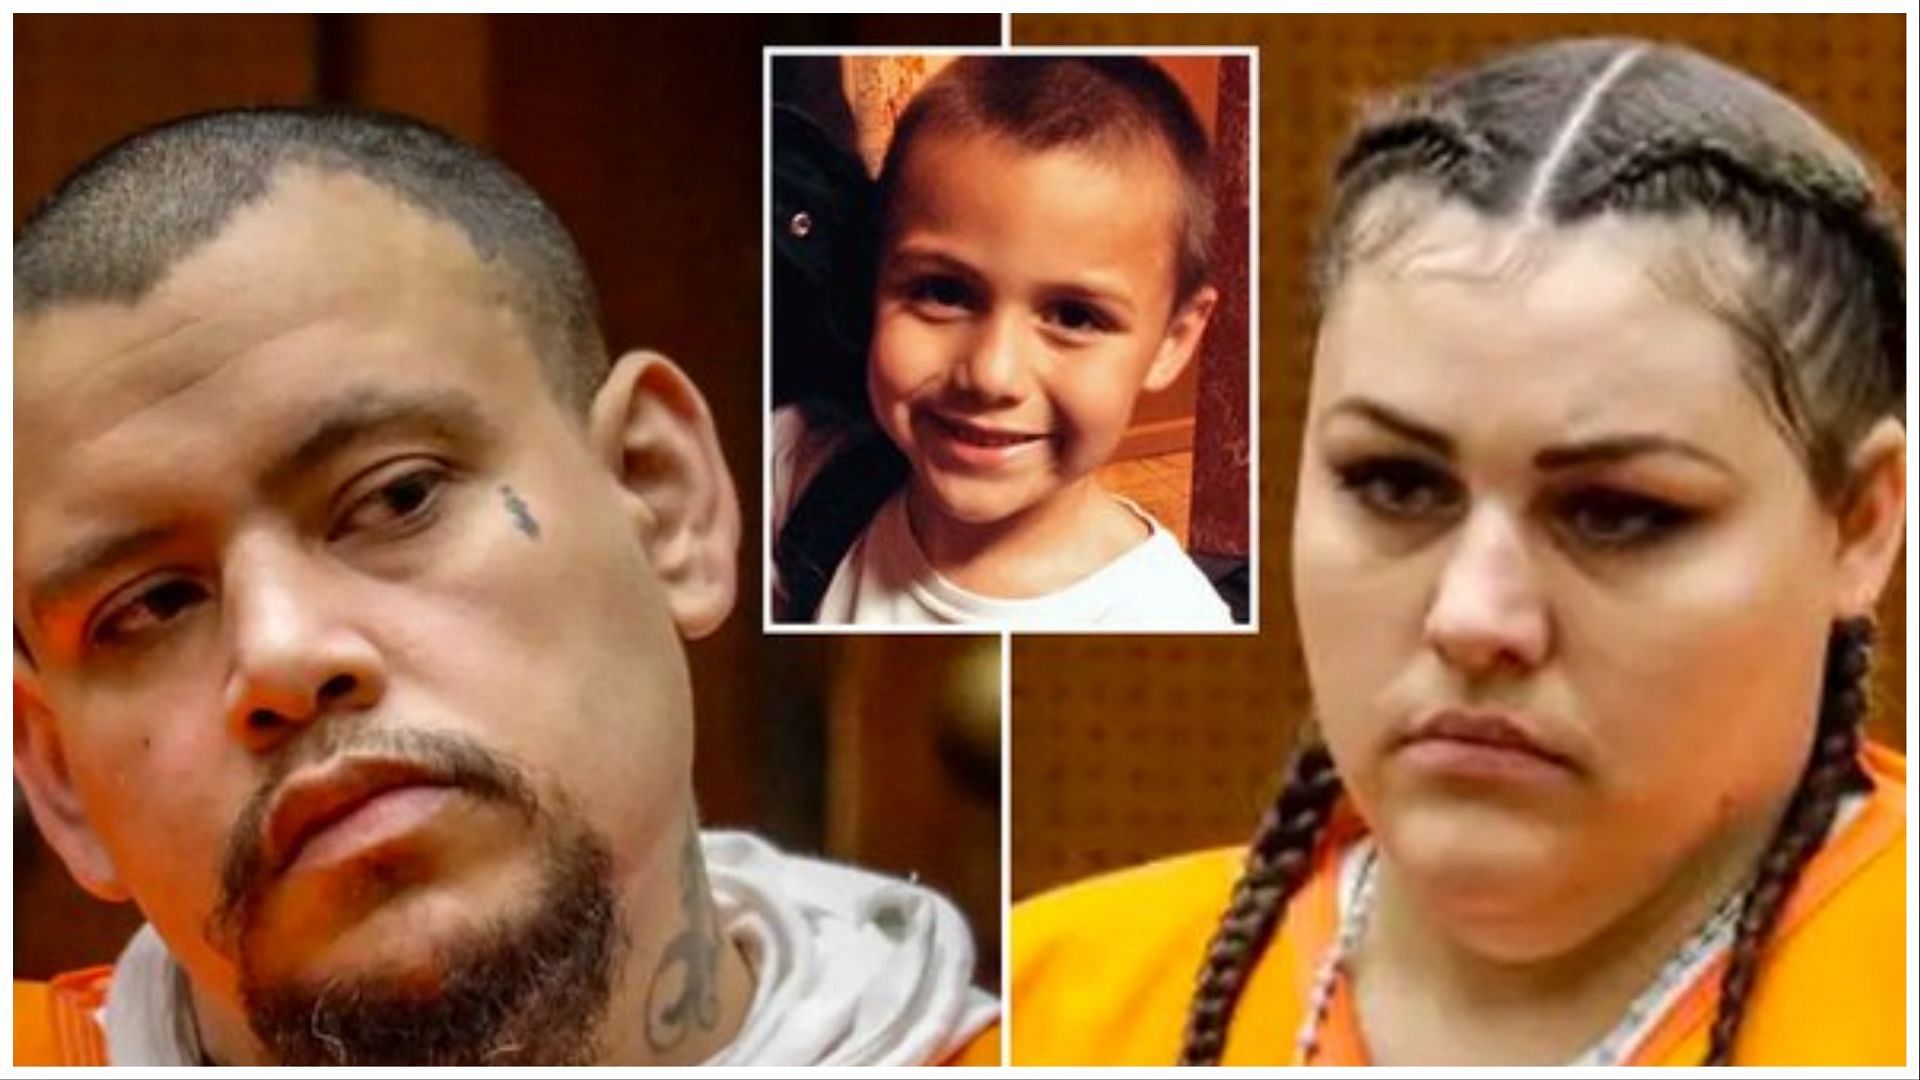 Heather Barron and her ex-boyfriend Kareem Leiva were found guilty of murdering 10-year-old Anthony Avalos in 2018, (Image via @mikerreports/Twitter)